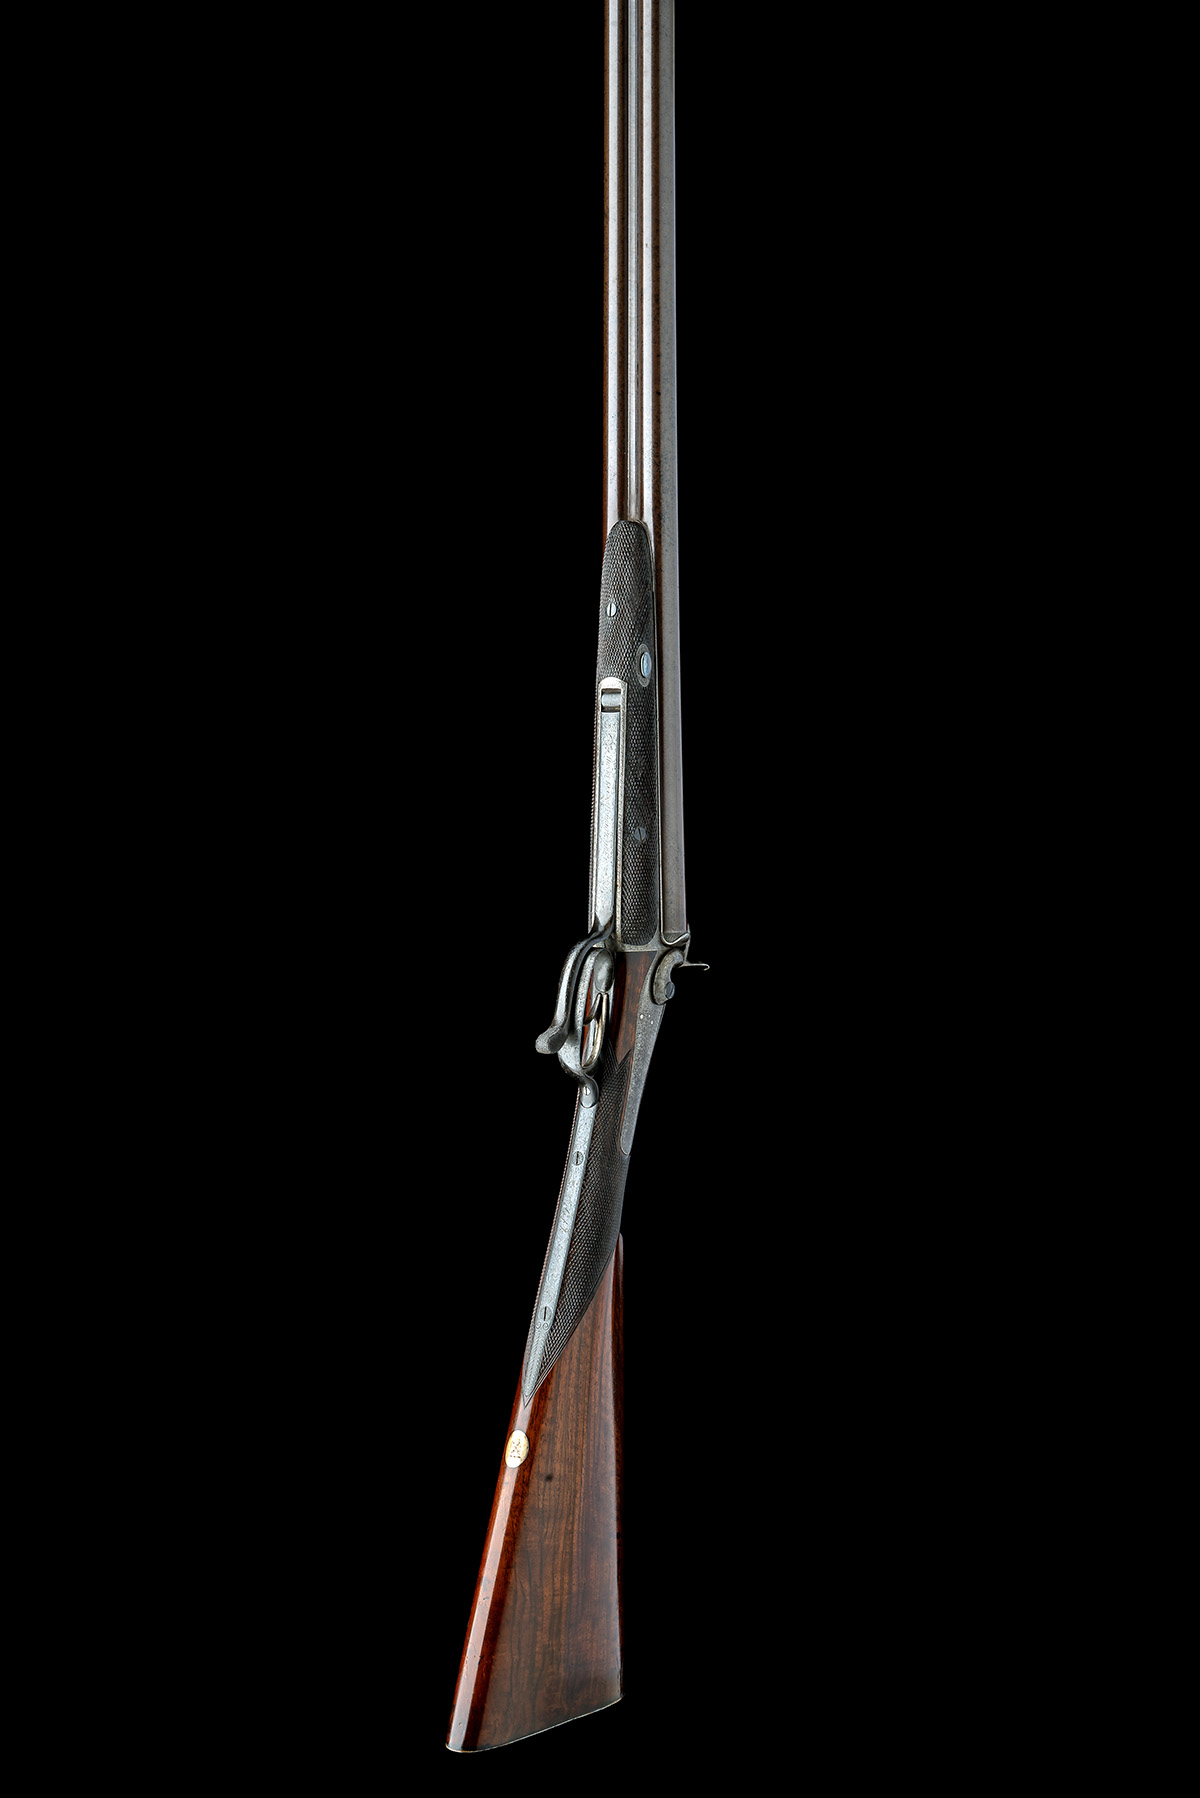 A 12-BORE PINFIRE A. ELVINS PATENT SLIDE-FORWARD DOUBLE-BARRELLED SPORTING GUN SIGNED HENRY EGG, - Image 8 of 9